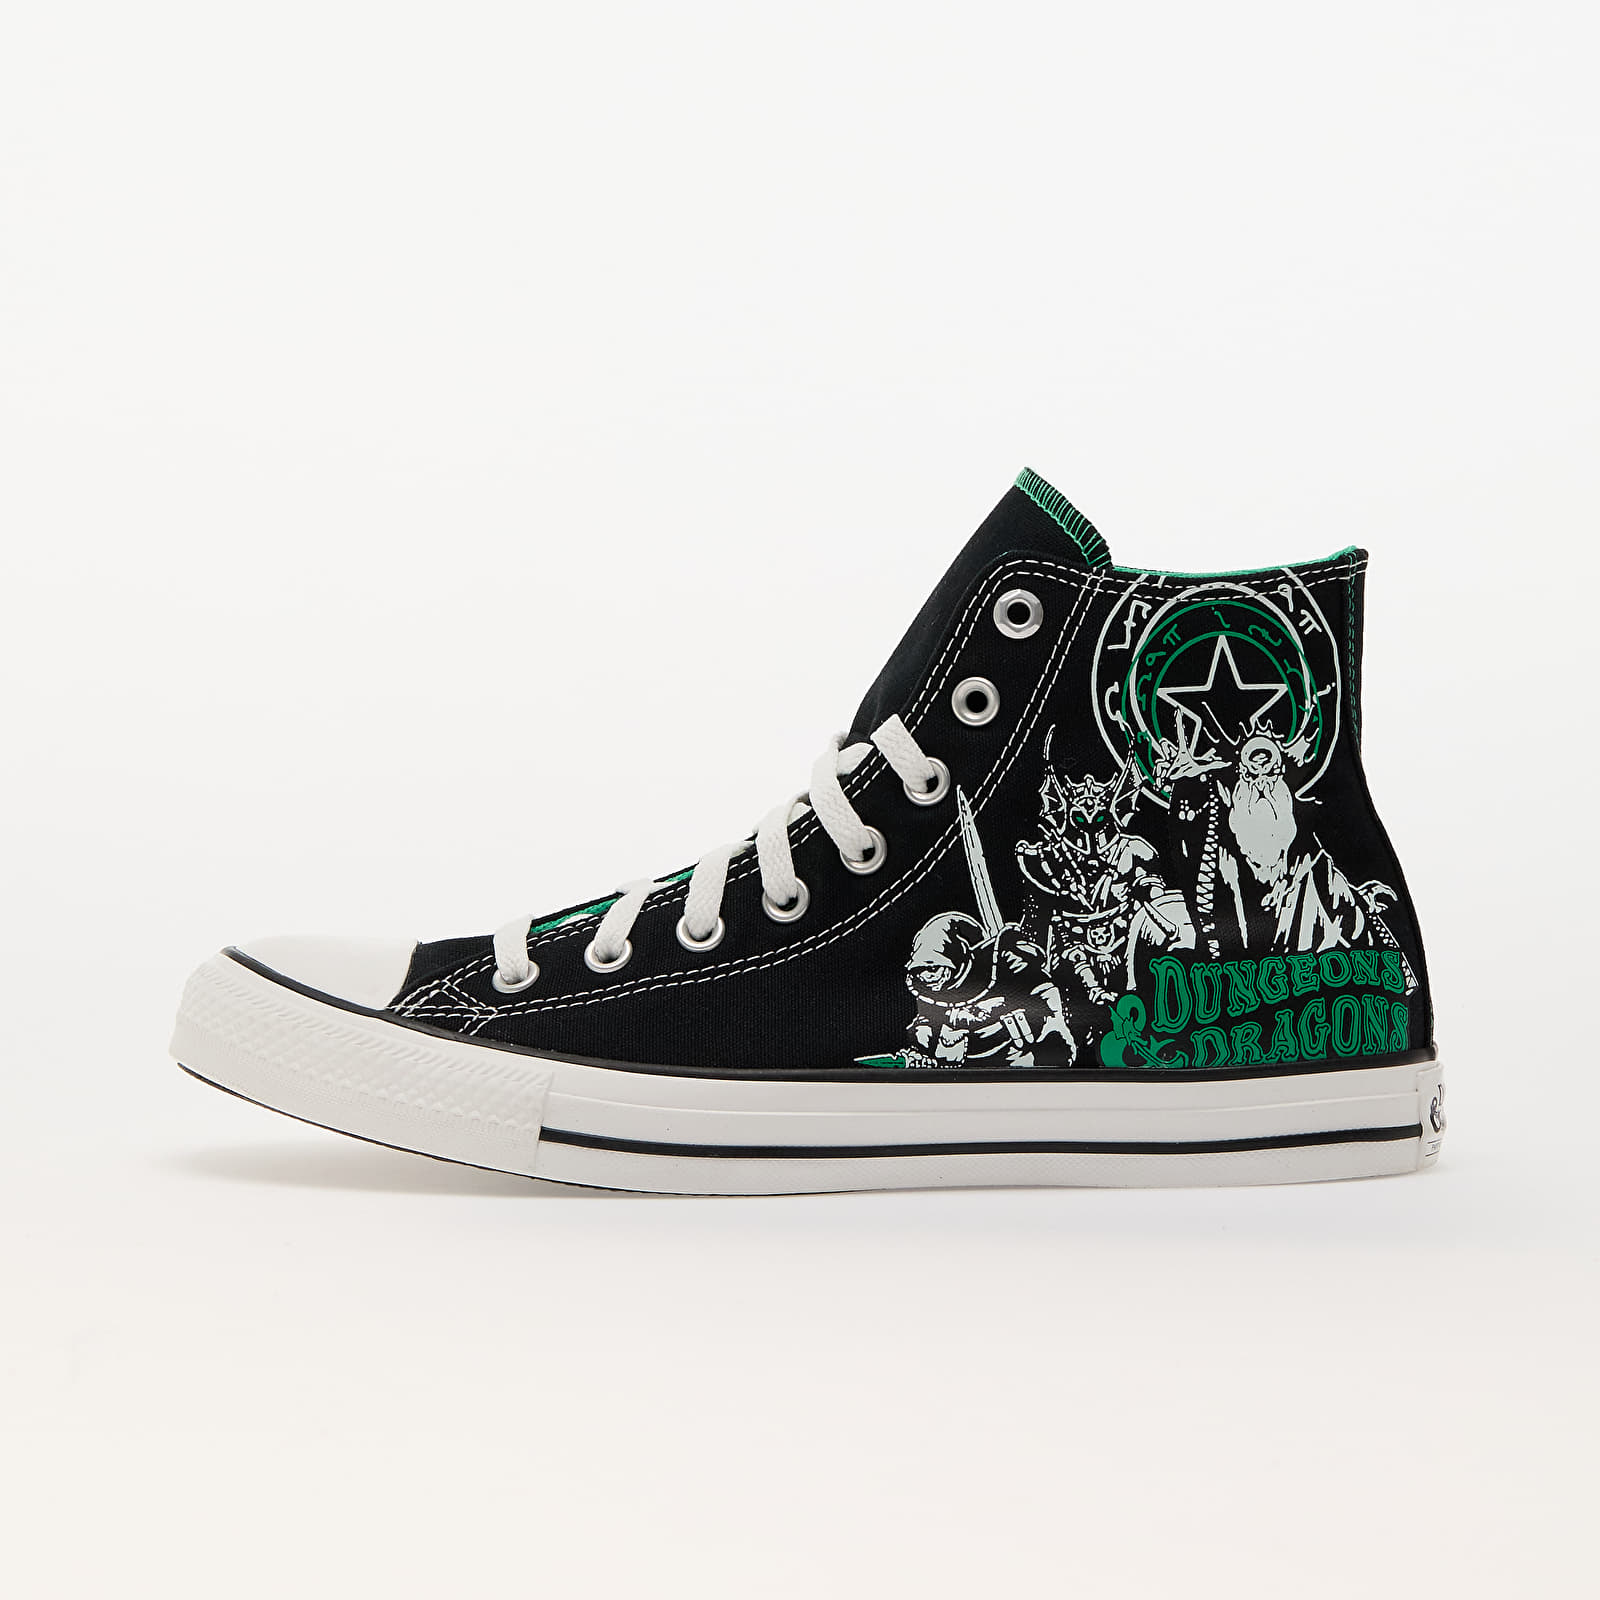 Men's shoes Converse x Dungeons & Dragons Chuck Taylor All Star Black/ Green/ White